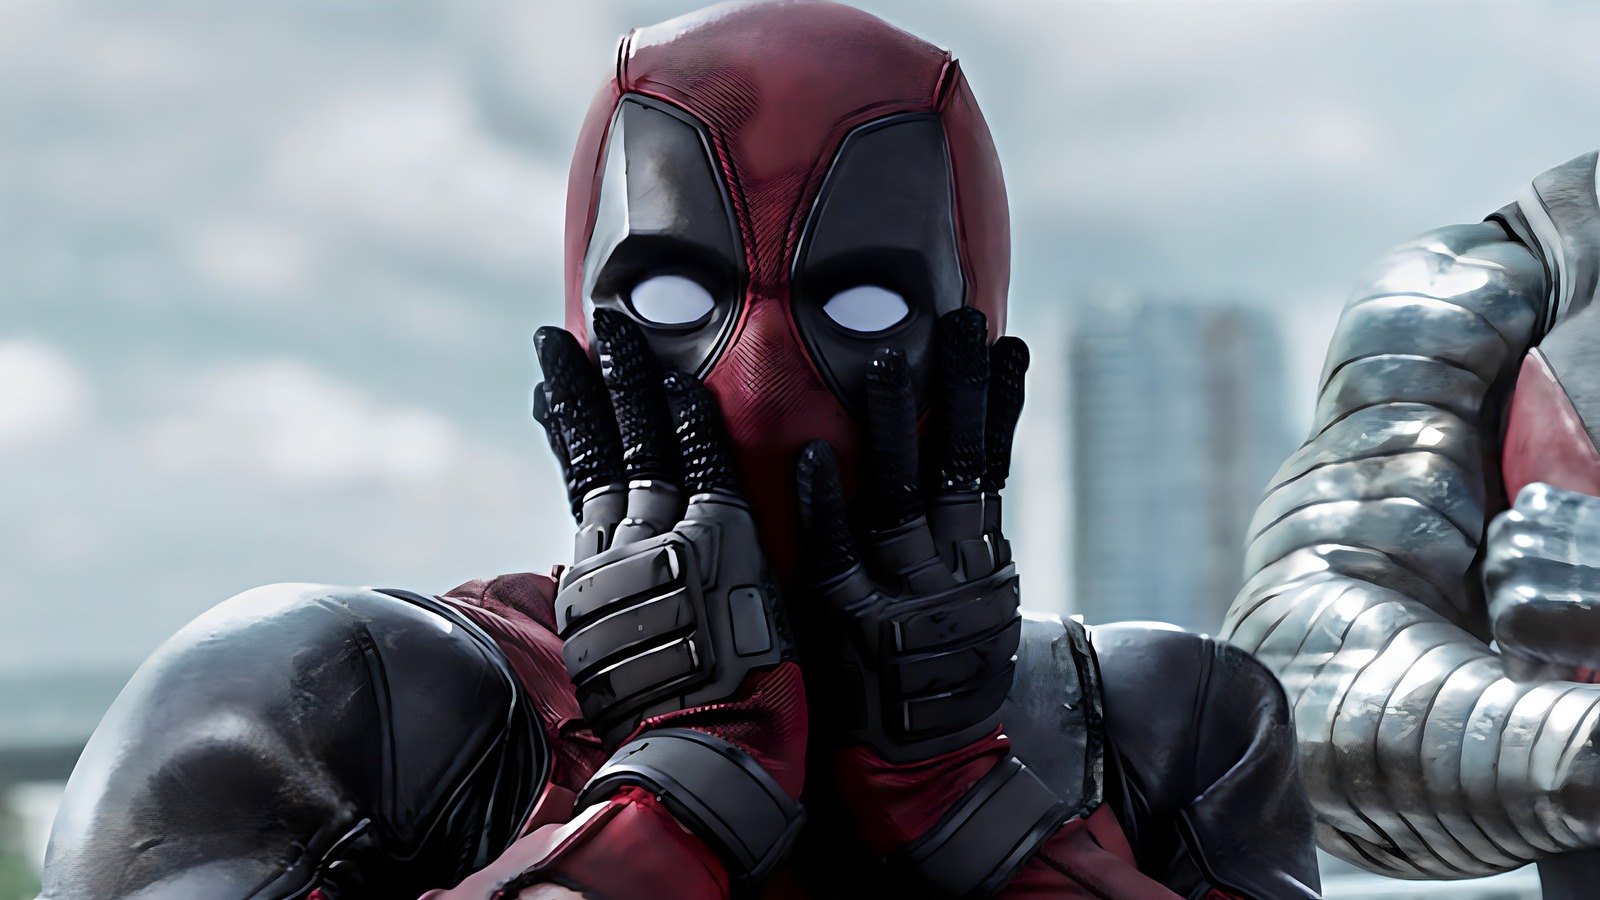 Will Deadpool 3 be rated R now that Disney is involved? Here's what we know